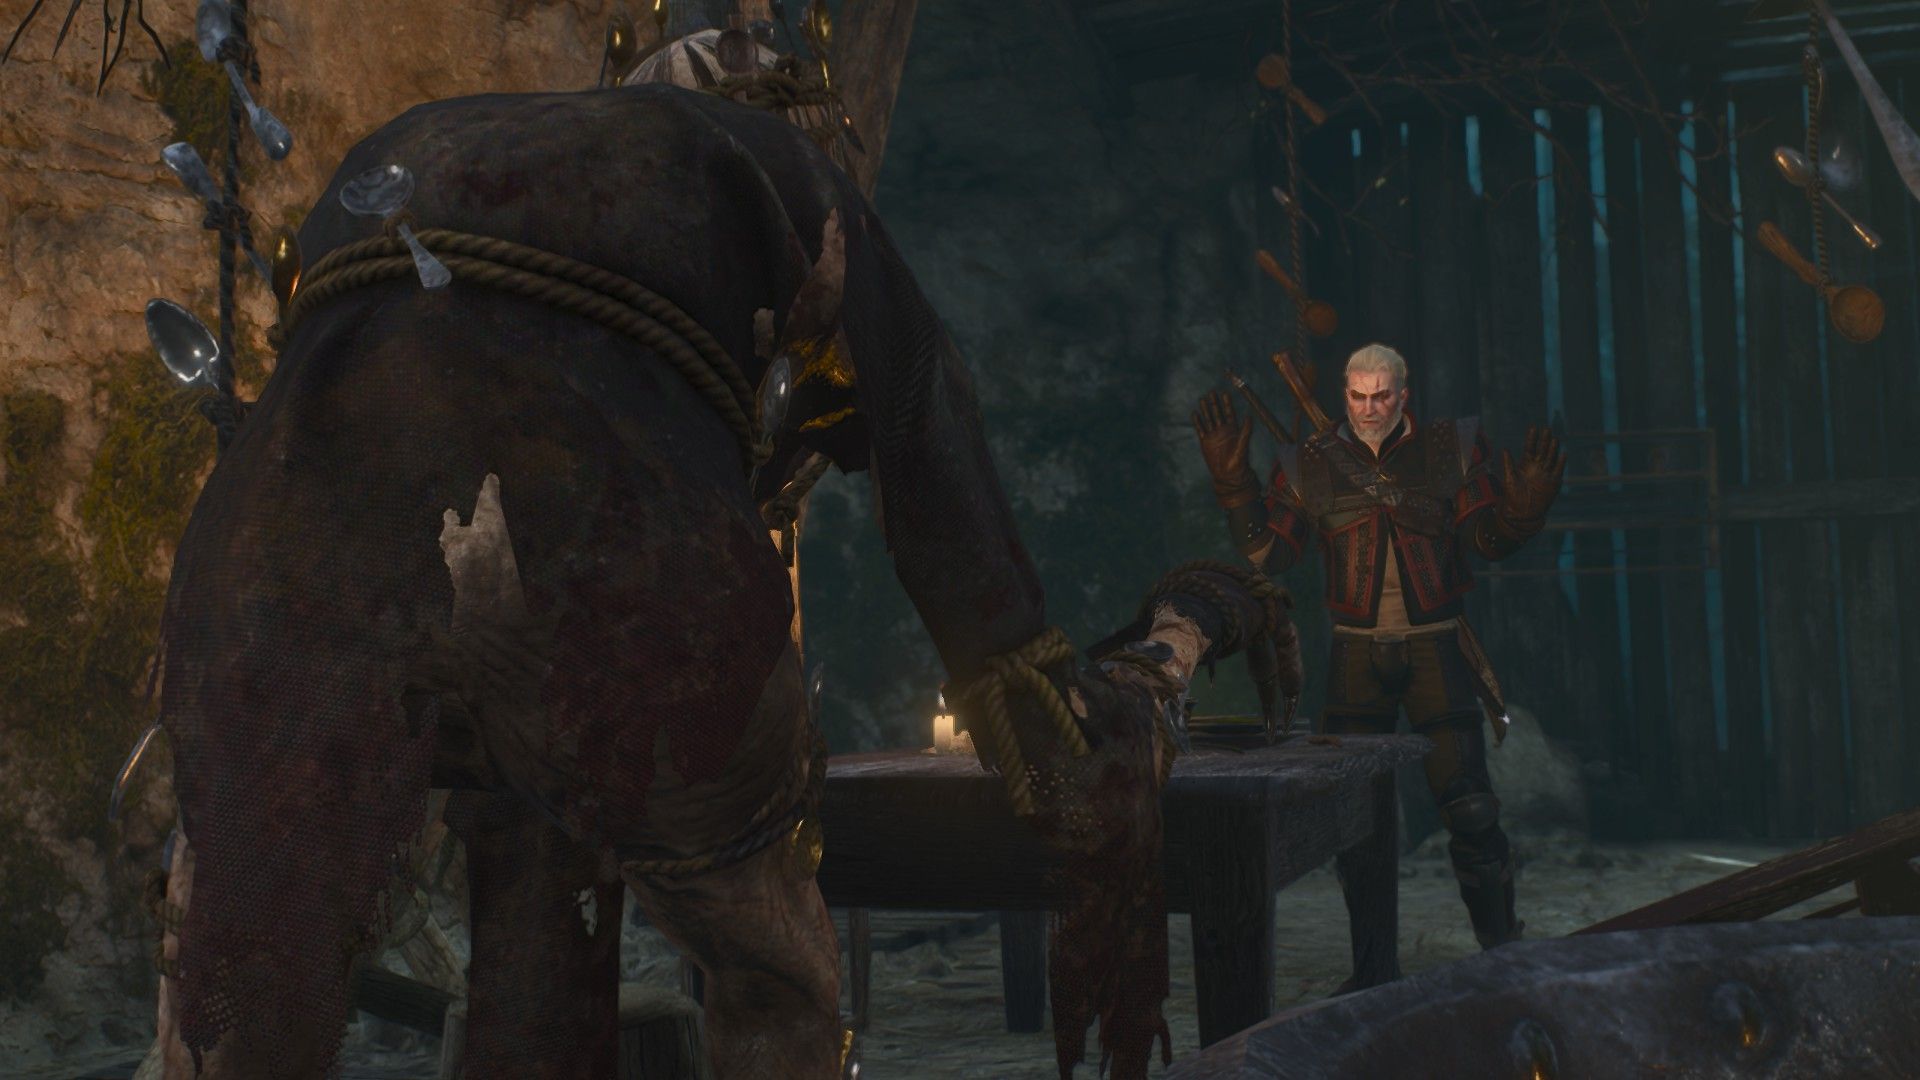 Geralt raises his hands and walks towards the monster, trying to talk to him.